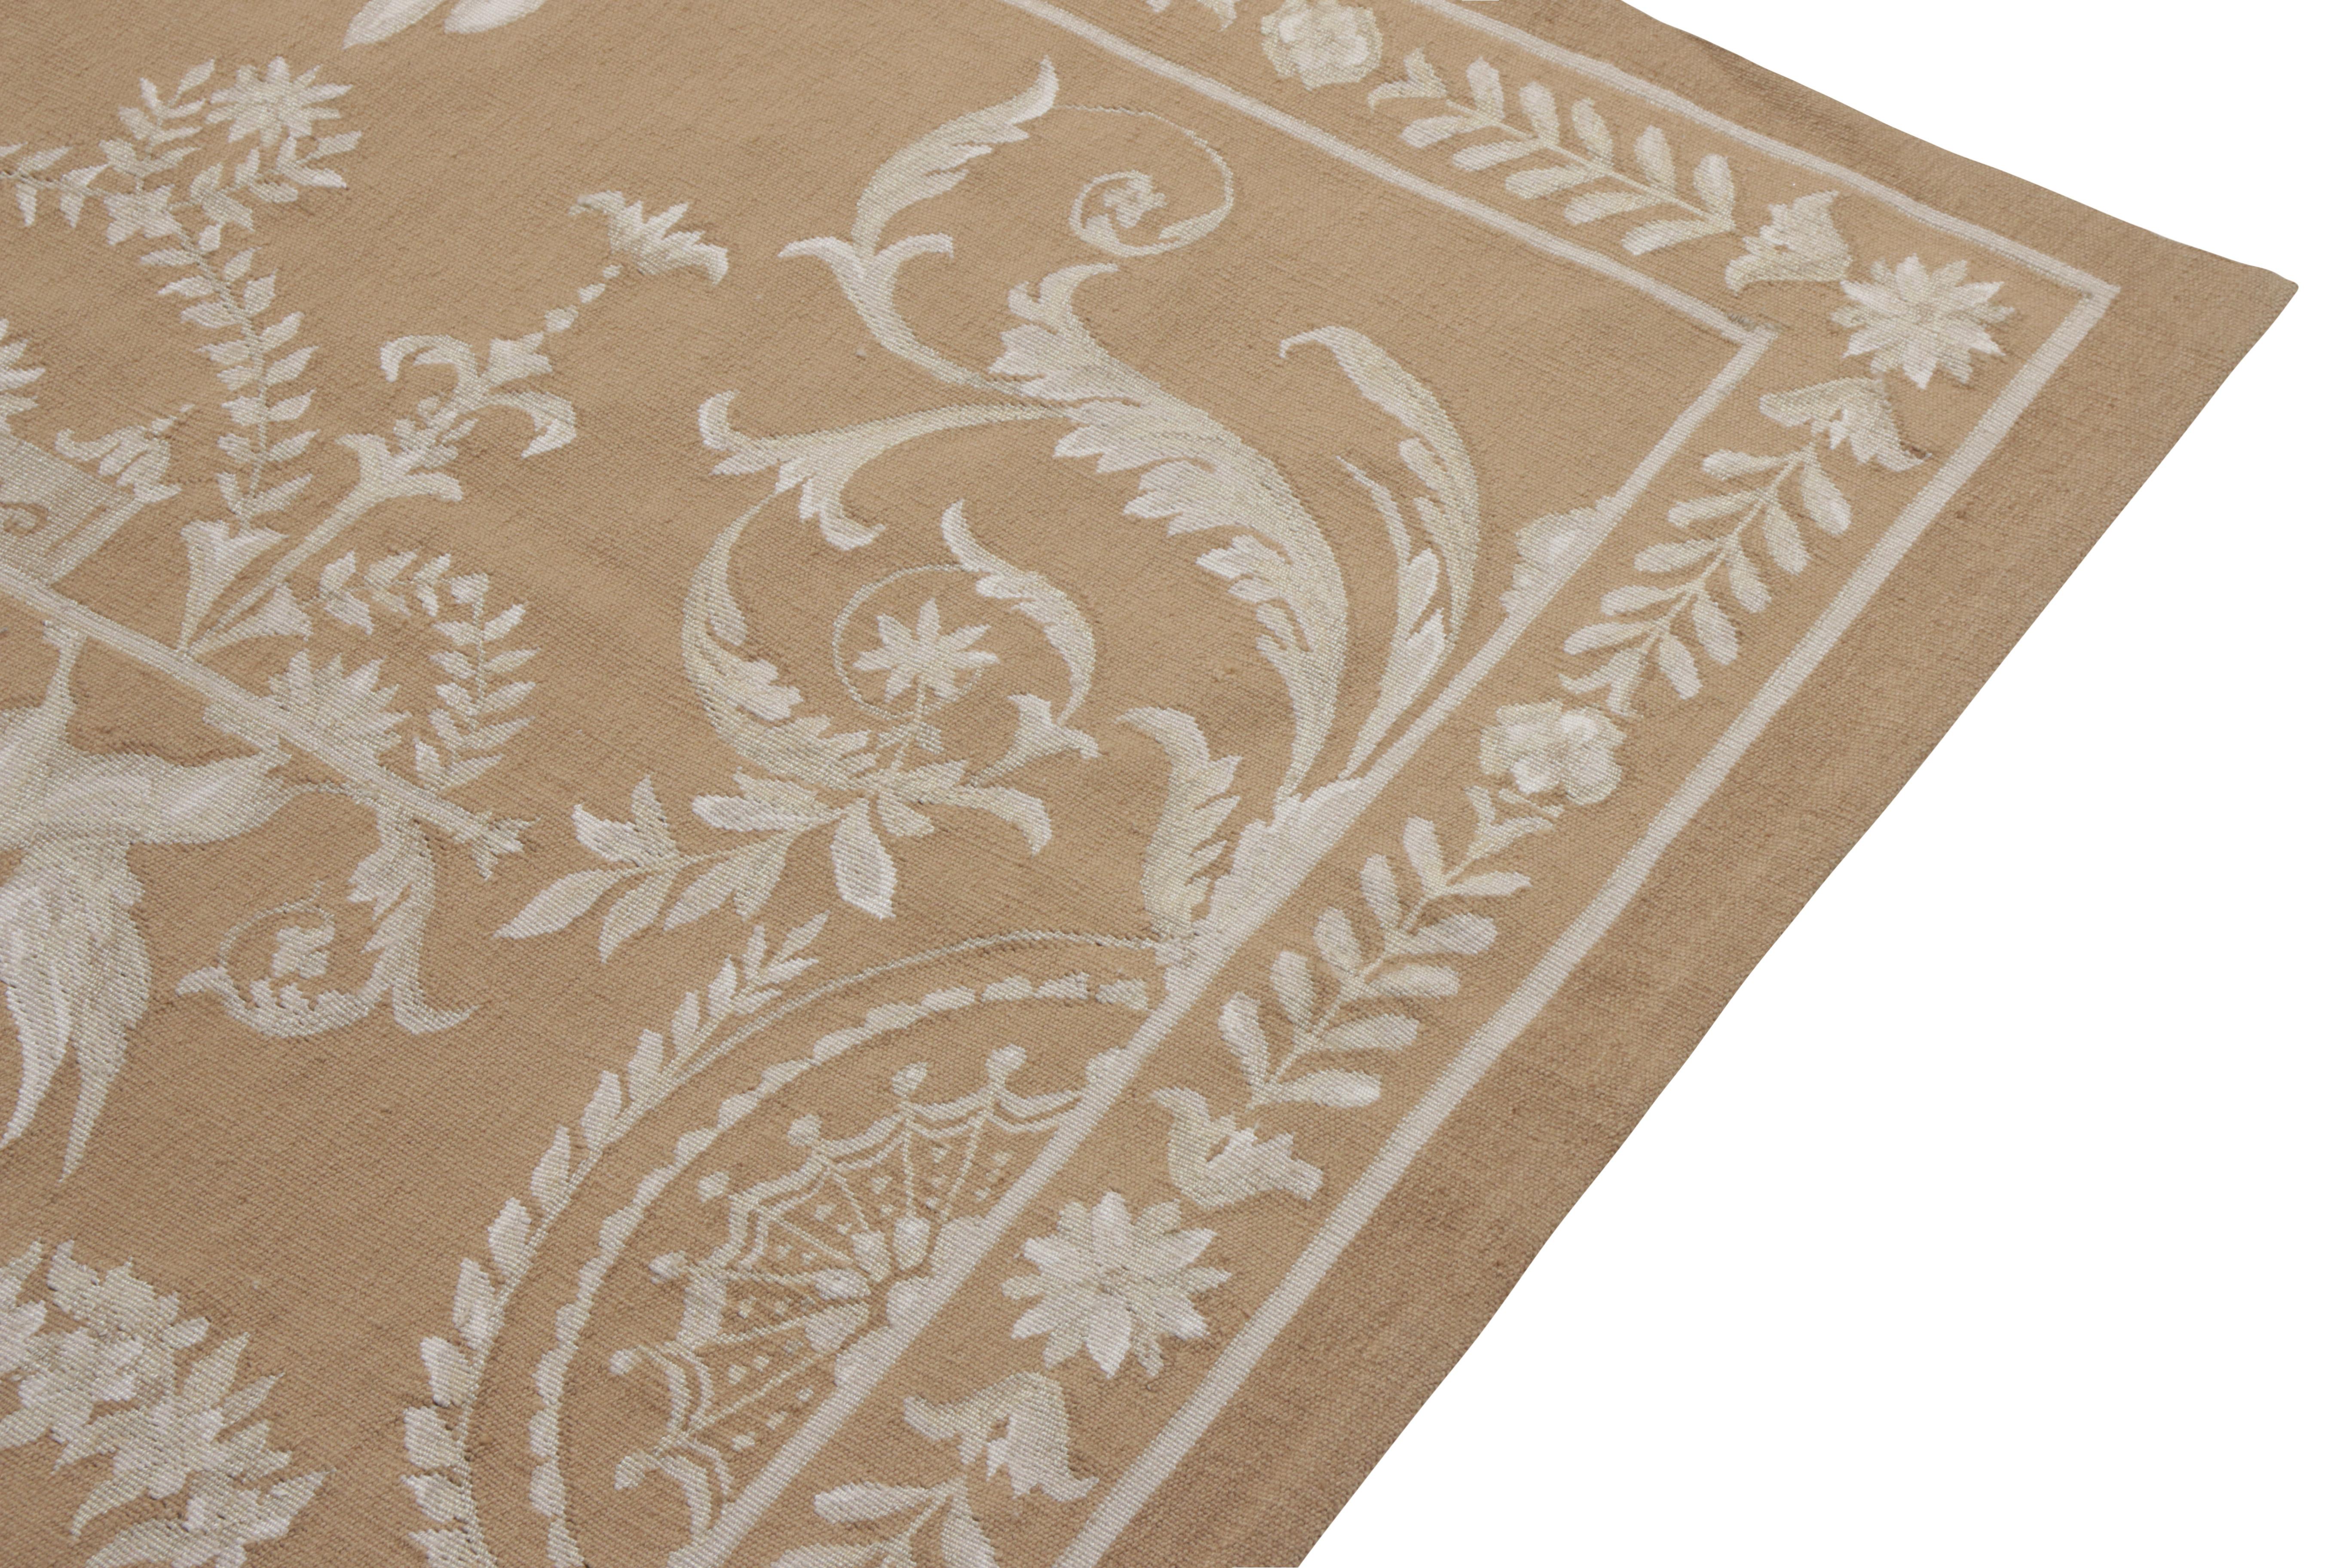 Hand-Knotted Rug & Kilim’s Aubusson Style Flat Weave in Beige-Brown, White Floral Pattern For Sale